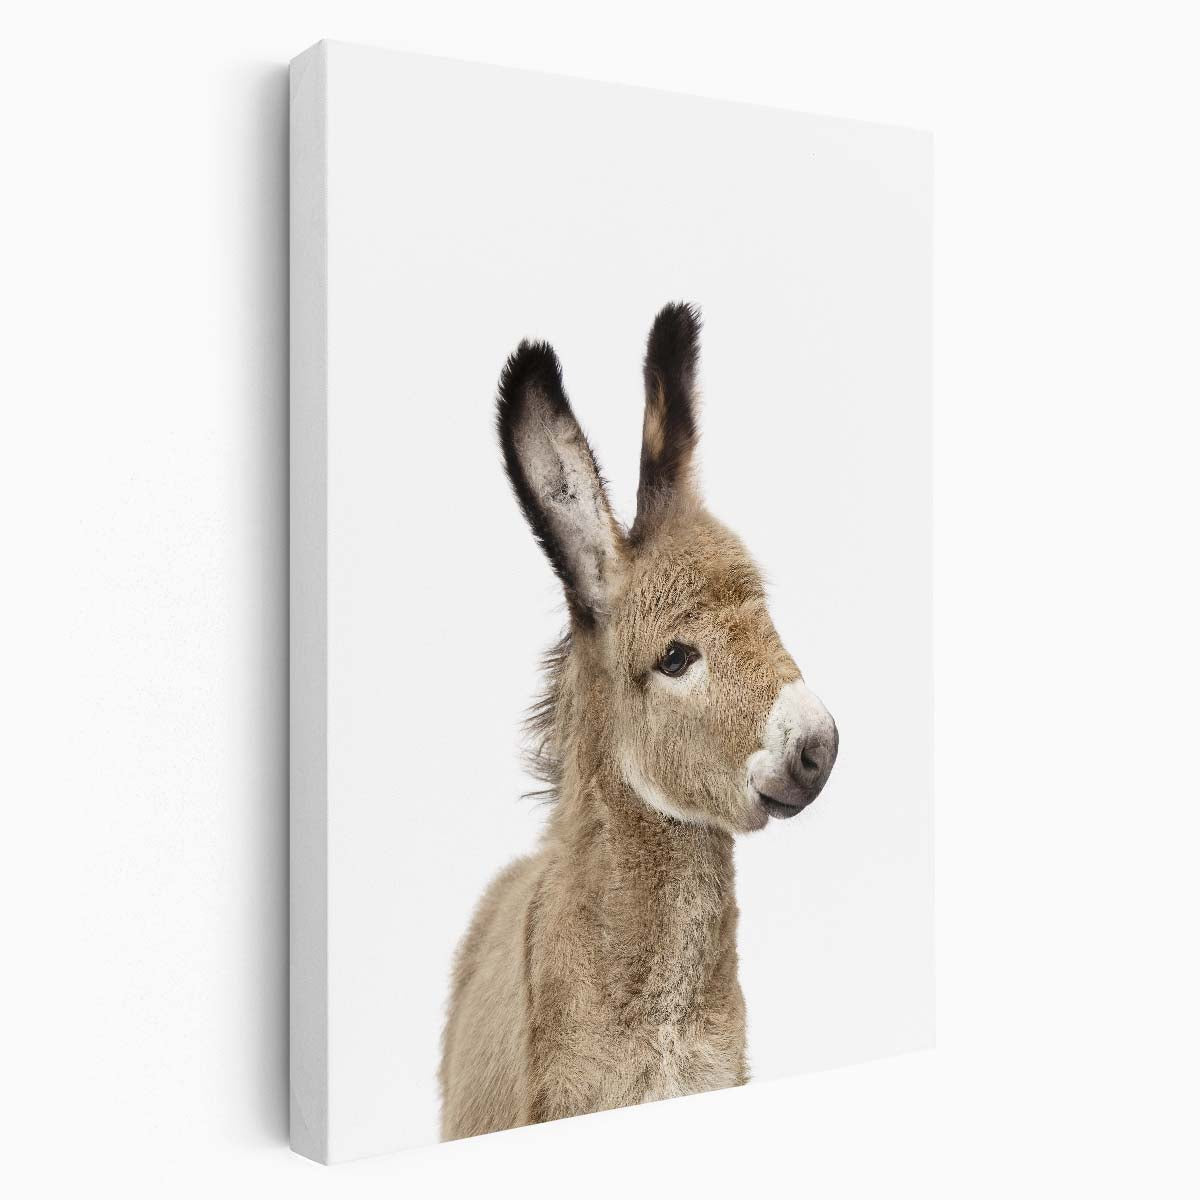 Baby Donkey Photography Art by Kathrin Pienaar by Luxuriance Designs, made in USA